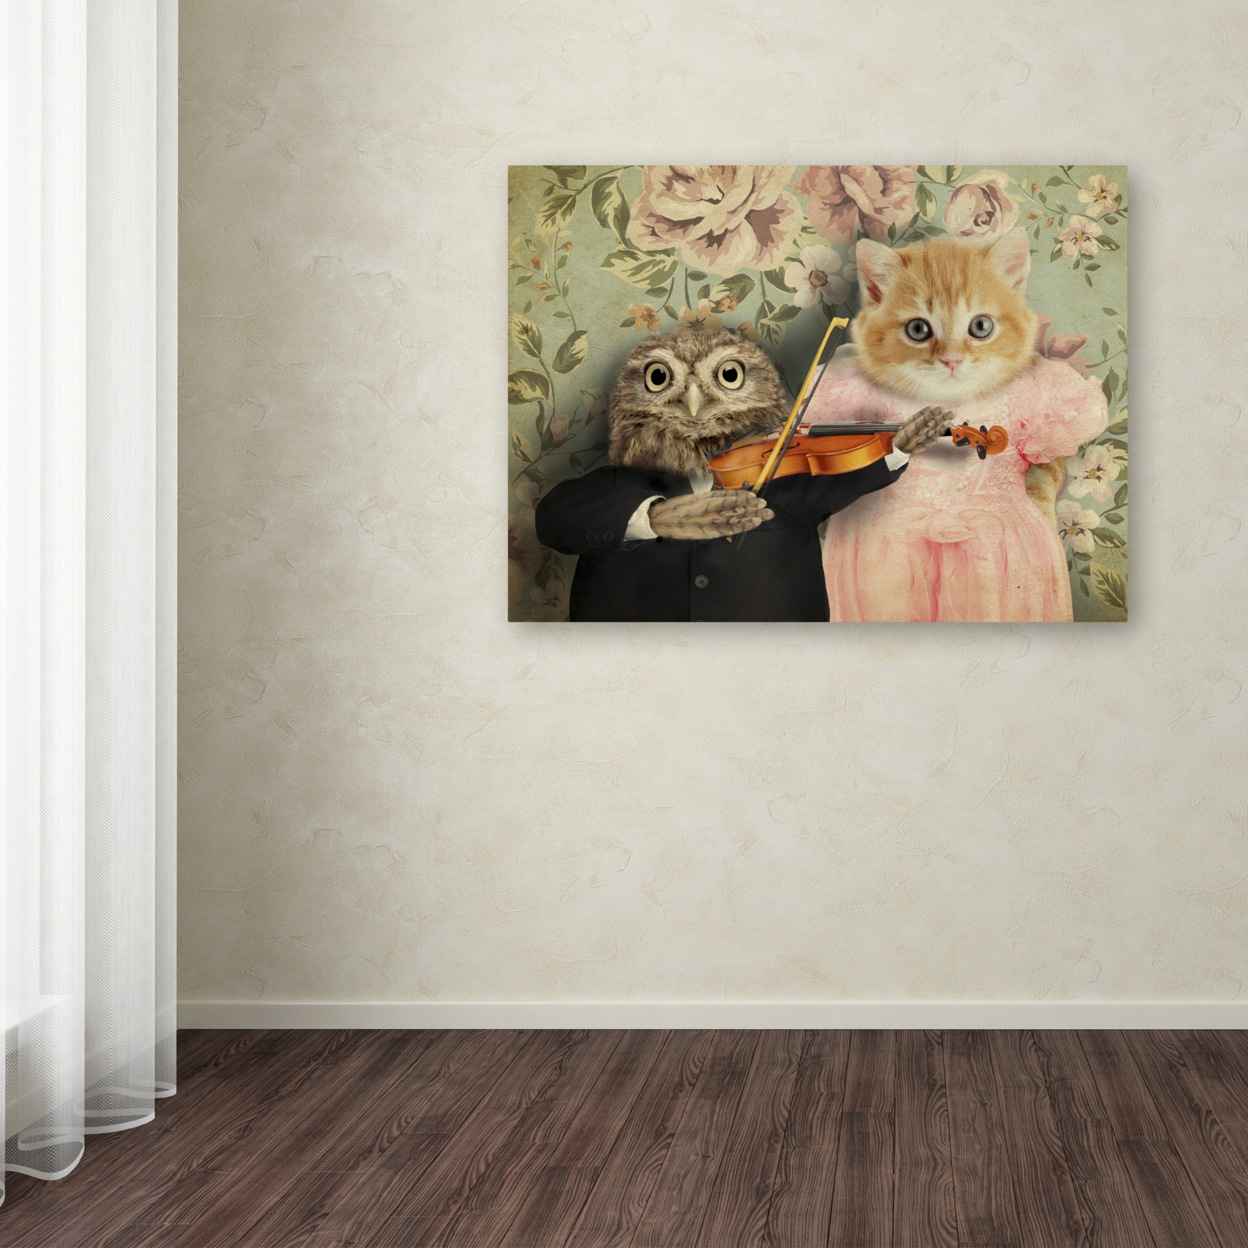 J Hovenstine Studios 'The Owl And The Pussycat' Canvas Wall Art 35 X 47 Inches